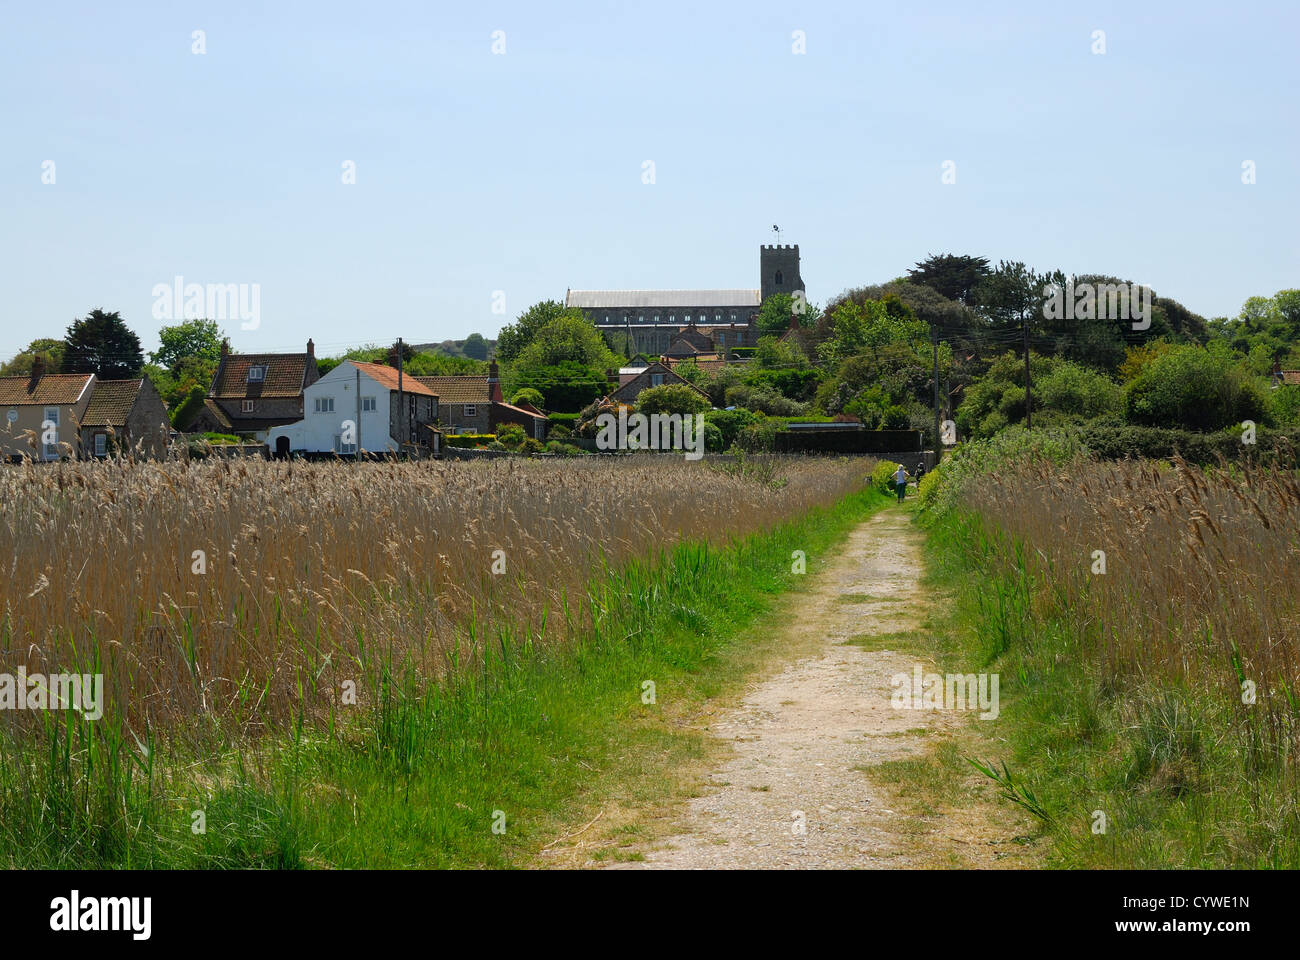 The Village of Salthouse, Norfolk, East Anglia, UK,  viewed from the footpath to the beach Stock Photo